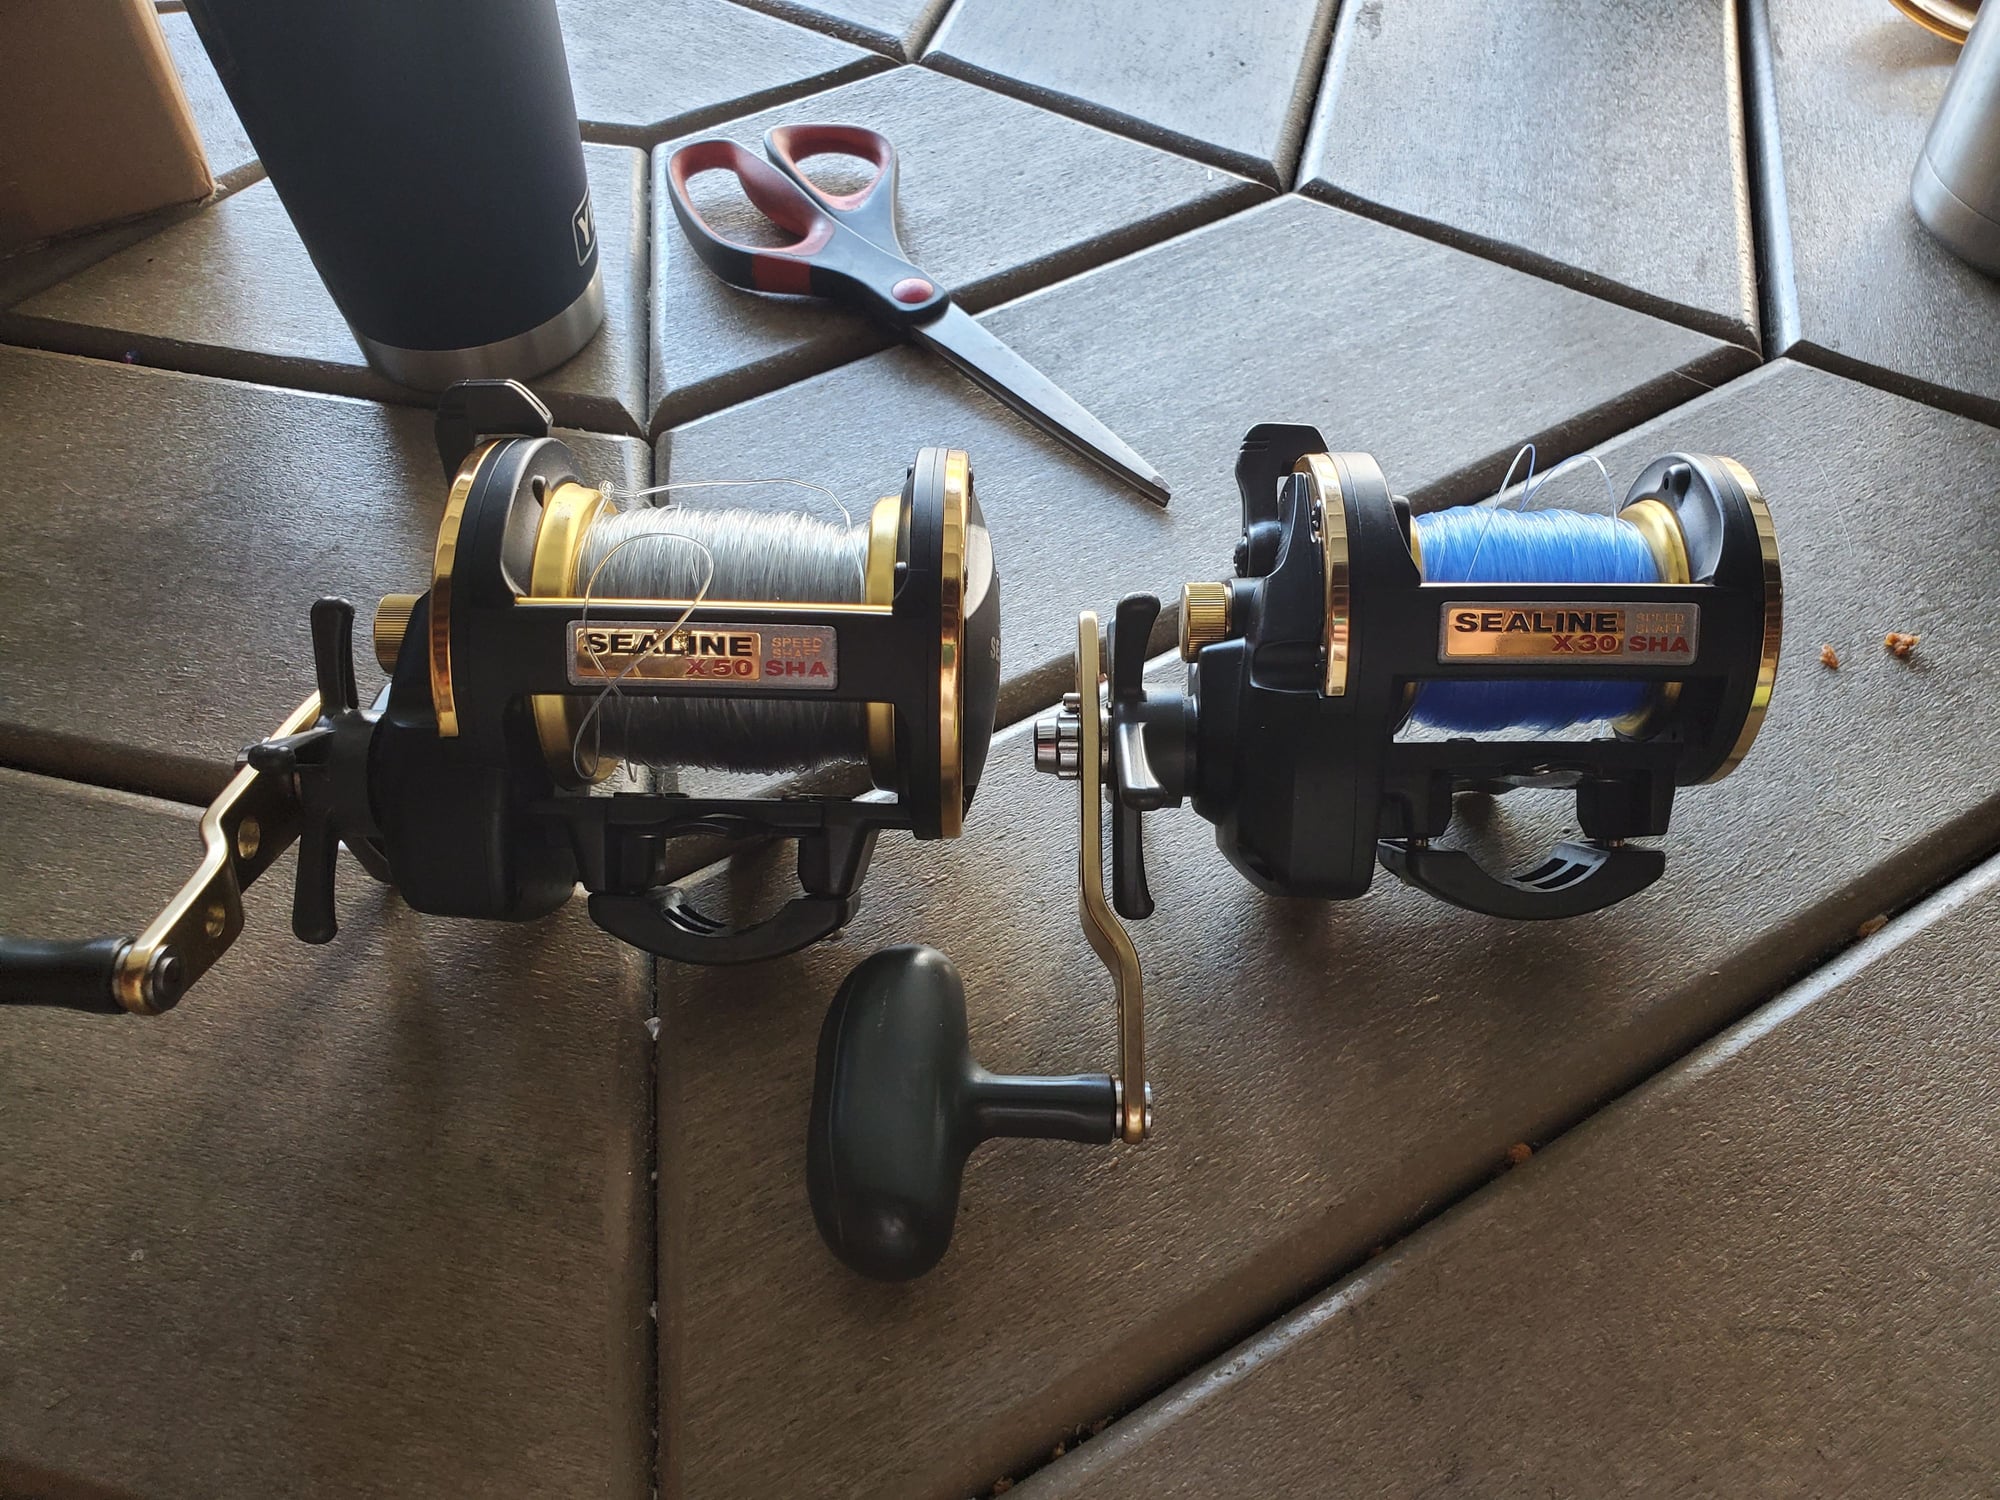 F/S Daiwa sealine reels - The Hull Truth - Boating and Fishing Forum